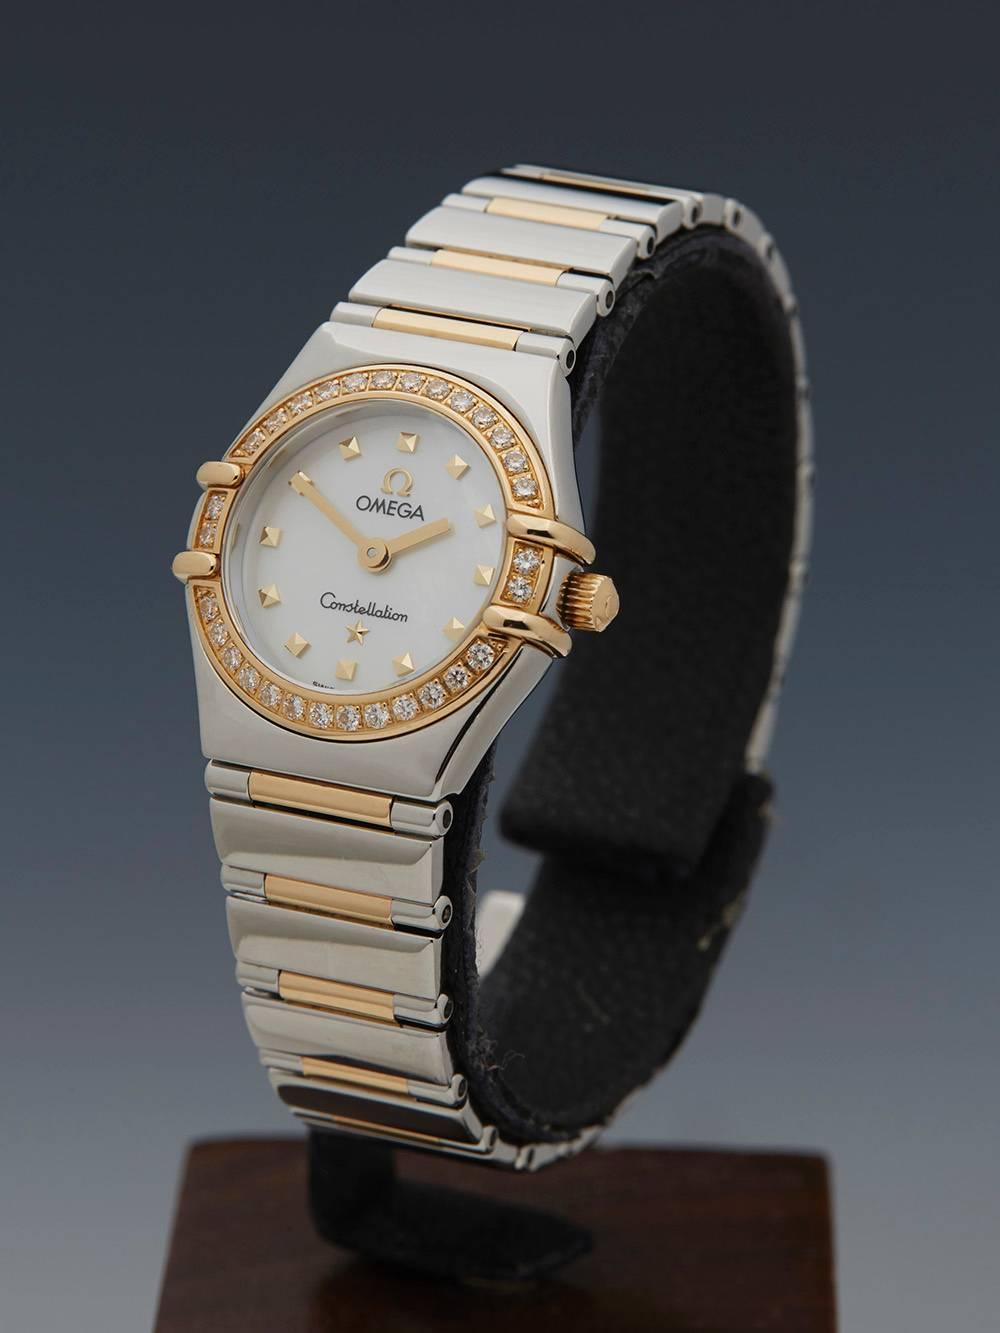 Specifications

Movement: Quartz
Case: Stainless Steel/18k Yellow Gold 
Case Diameter: 22.5mm  
Dial: White Mother of Pearl 
Bracelet: Stainless Steel/18k Yellow Gold 
Buckle: Deployment  
Glass: Sapphire Crystal
Water Resistance: To